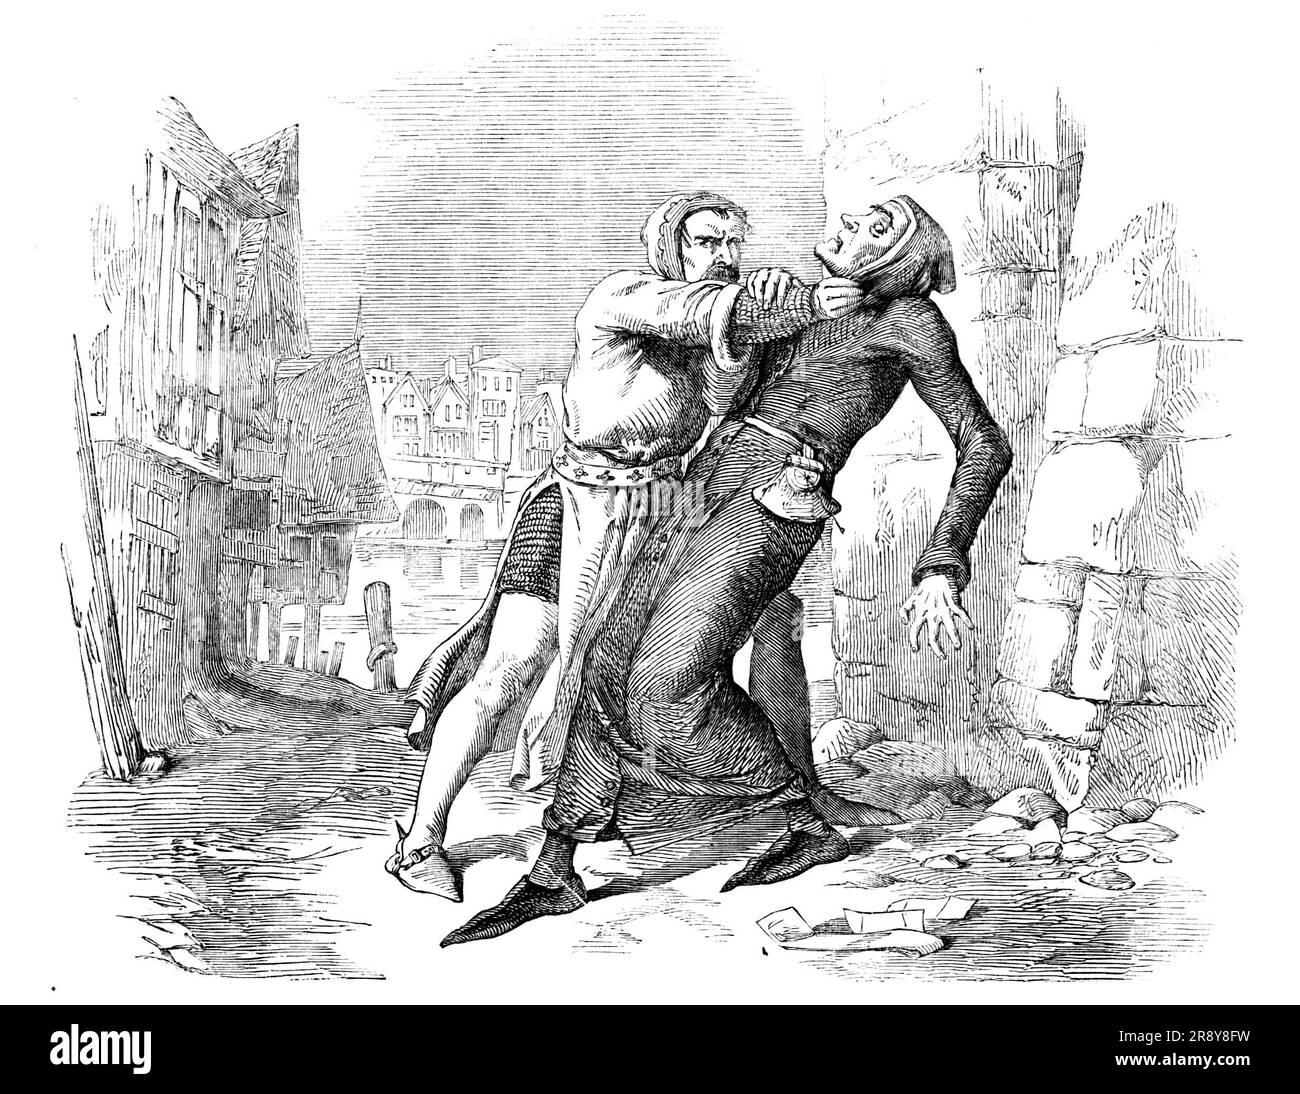 The Caorsin seizing Master Walter by the Throat, 1857. Scene from &quot;Master Walter, the Physician. A Tale of Old London&quot;: 'Master Walter could read no more. He flung the paper wildly in the air, and would have rushed from the spot; but the Caorsin caught him by the throat...&quot;Miserable quacksalver!&quot; cried he; &quot;whose were the chirographs on which I lent thee two thousands marks?&quot; The leech could not reply, for his companion's question filled him with a horrid foreboding'. From &quot;Illustrated London News&quot;, 1857. Stock Photo